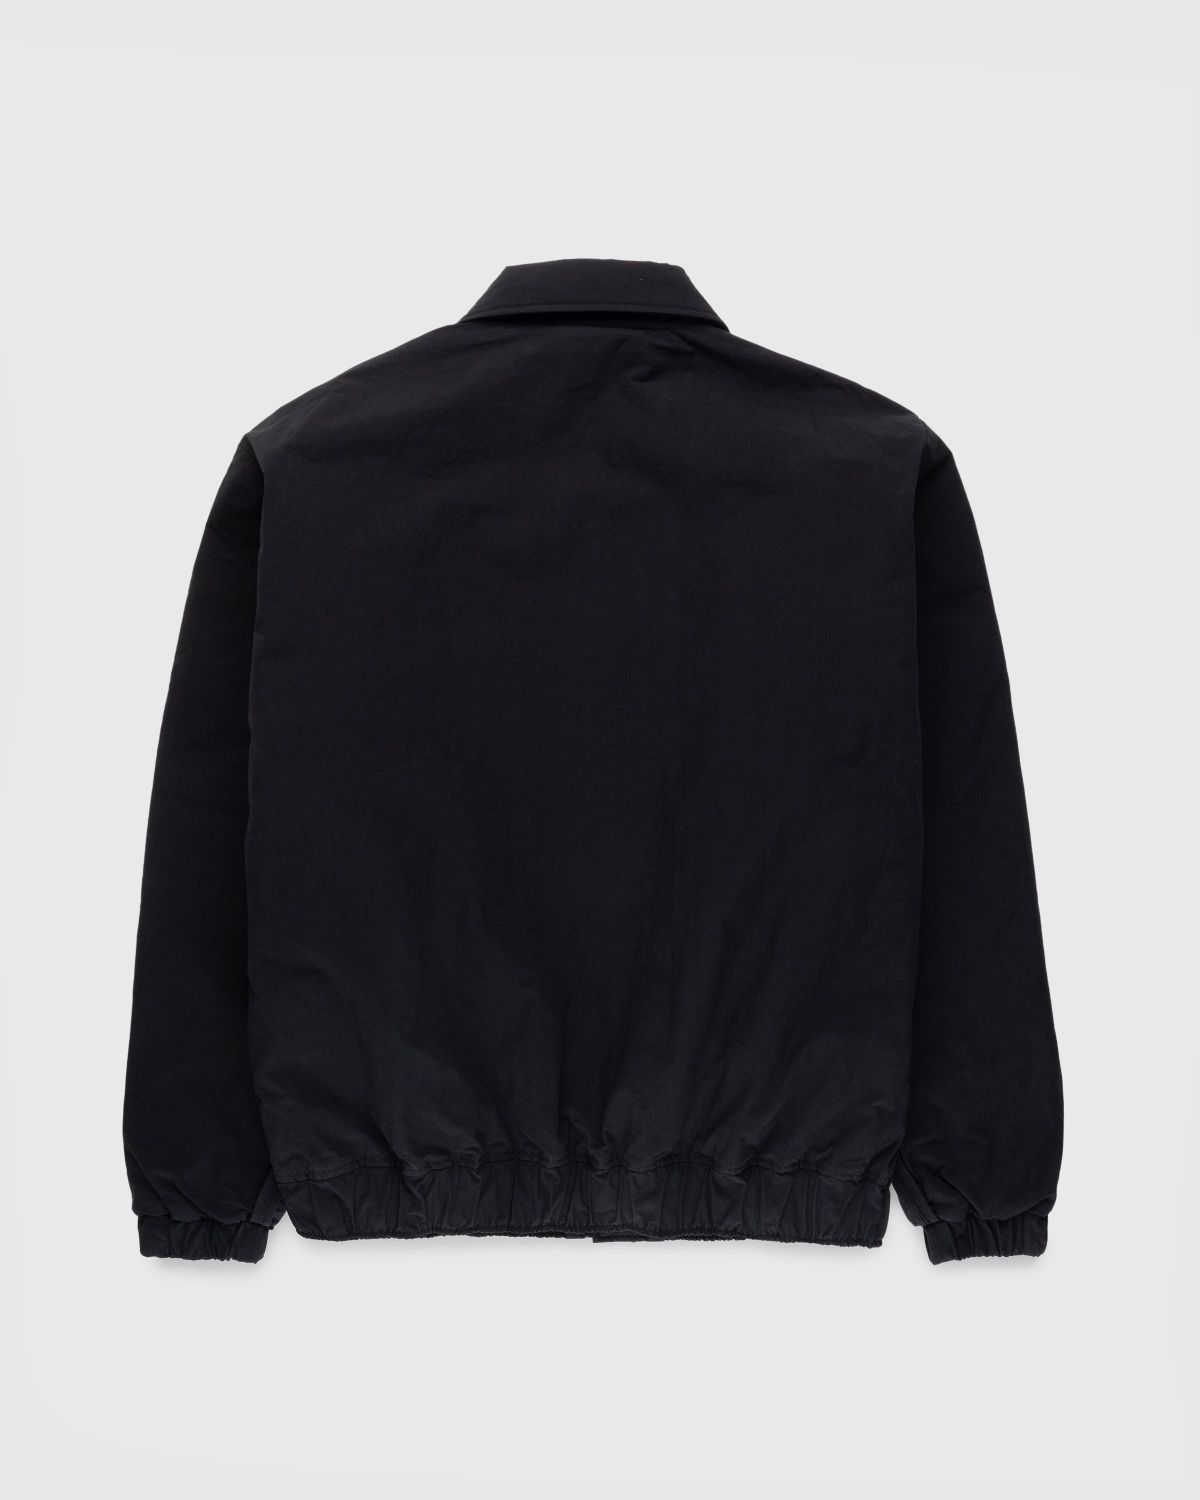 Highsnobiety HS05 – Reverse Piping Insulated Jacket Black - Outerwear - Black - Image 2